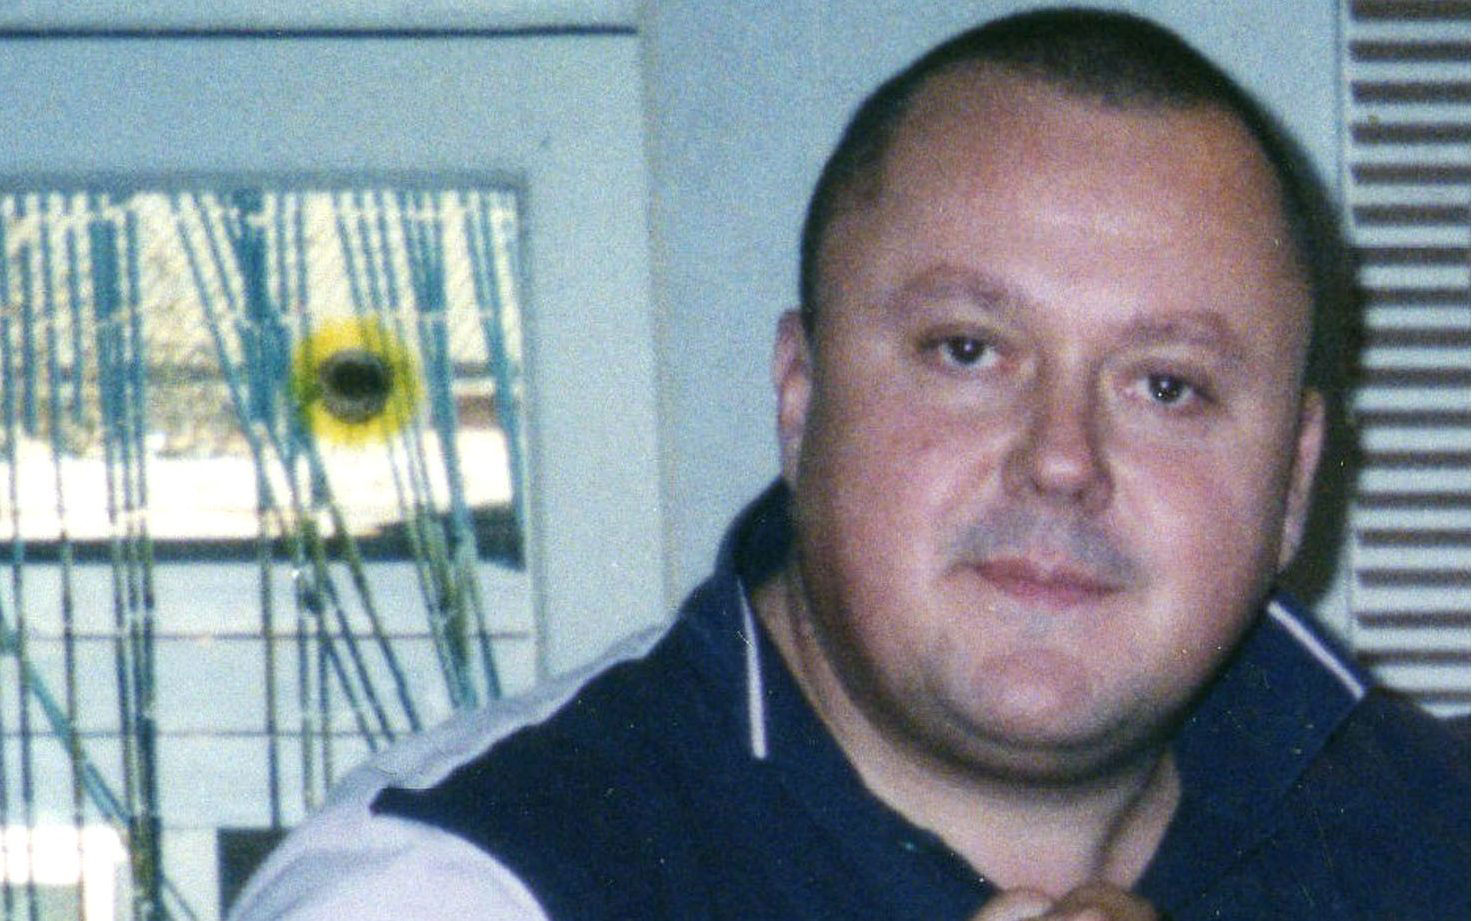 Serial killer Levi Bellfield allowed to marry while in prison